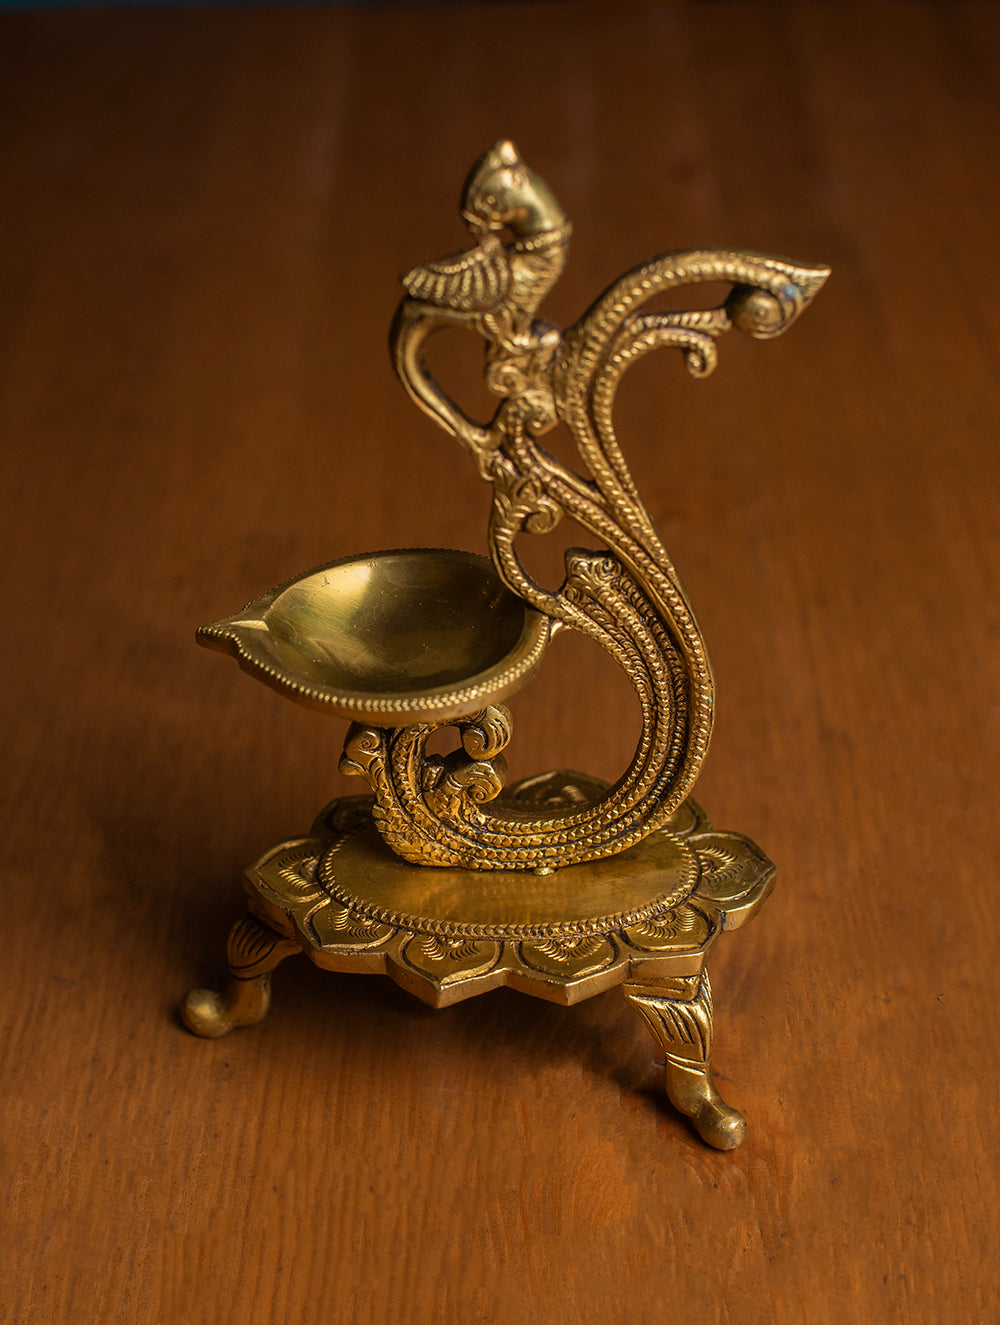 Load image into Gallery viewer, Brass Moulded Oil Lamp / Curio - Parrot